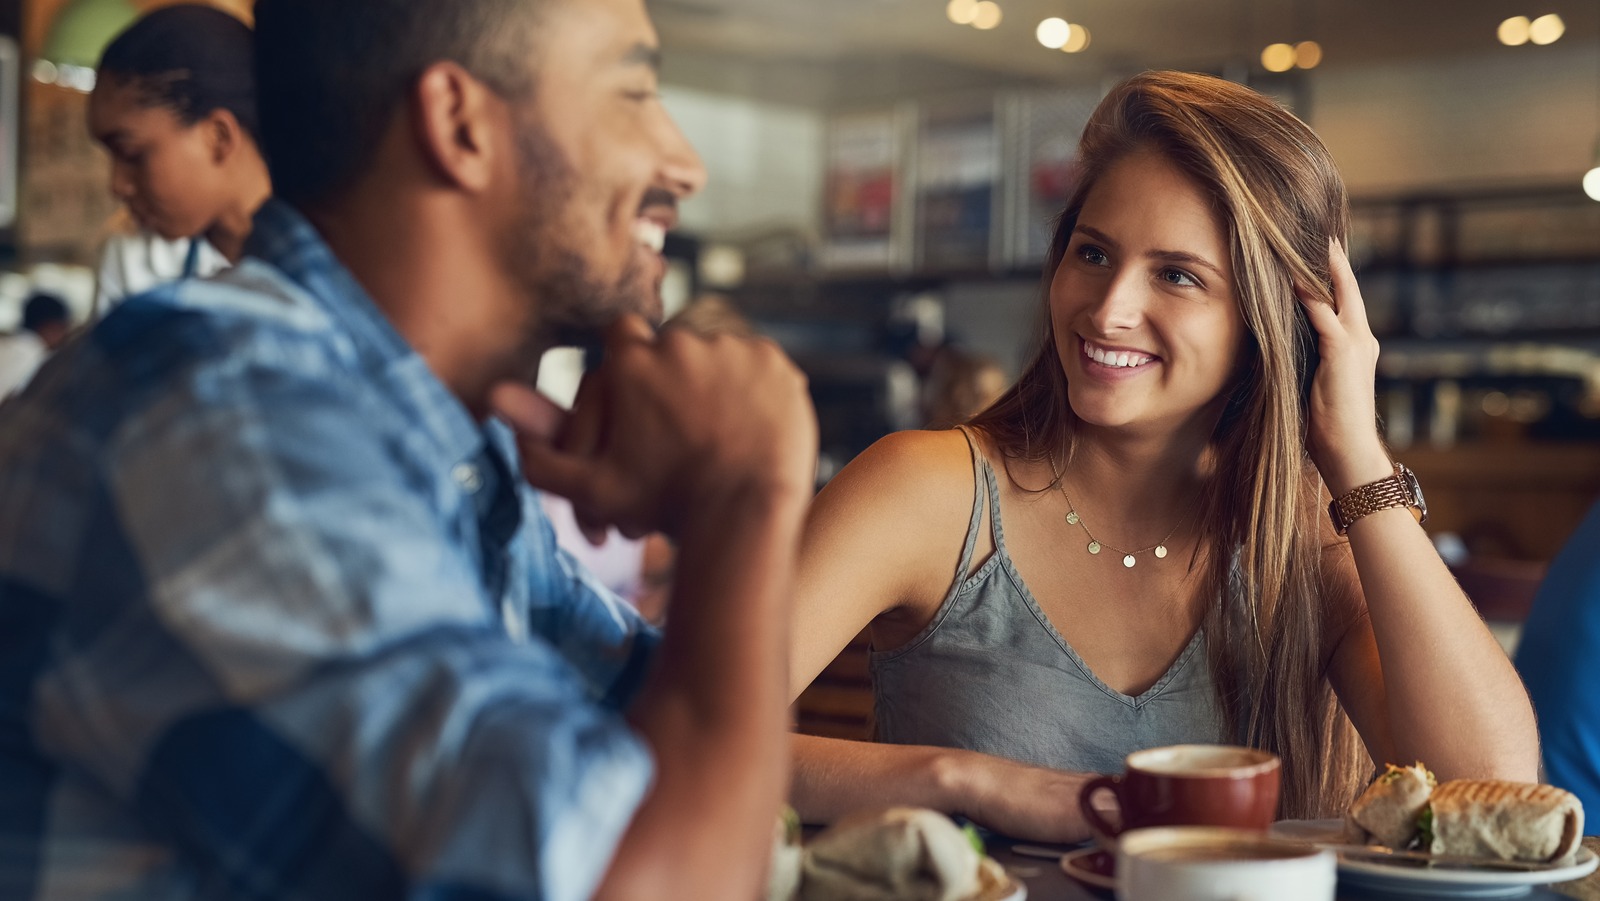 How To Set Up Friends On A Blind Date Without Intruding